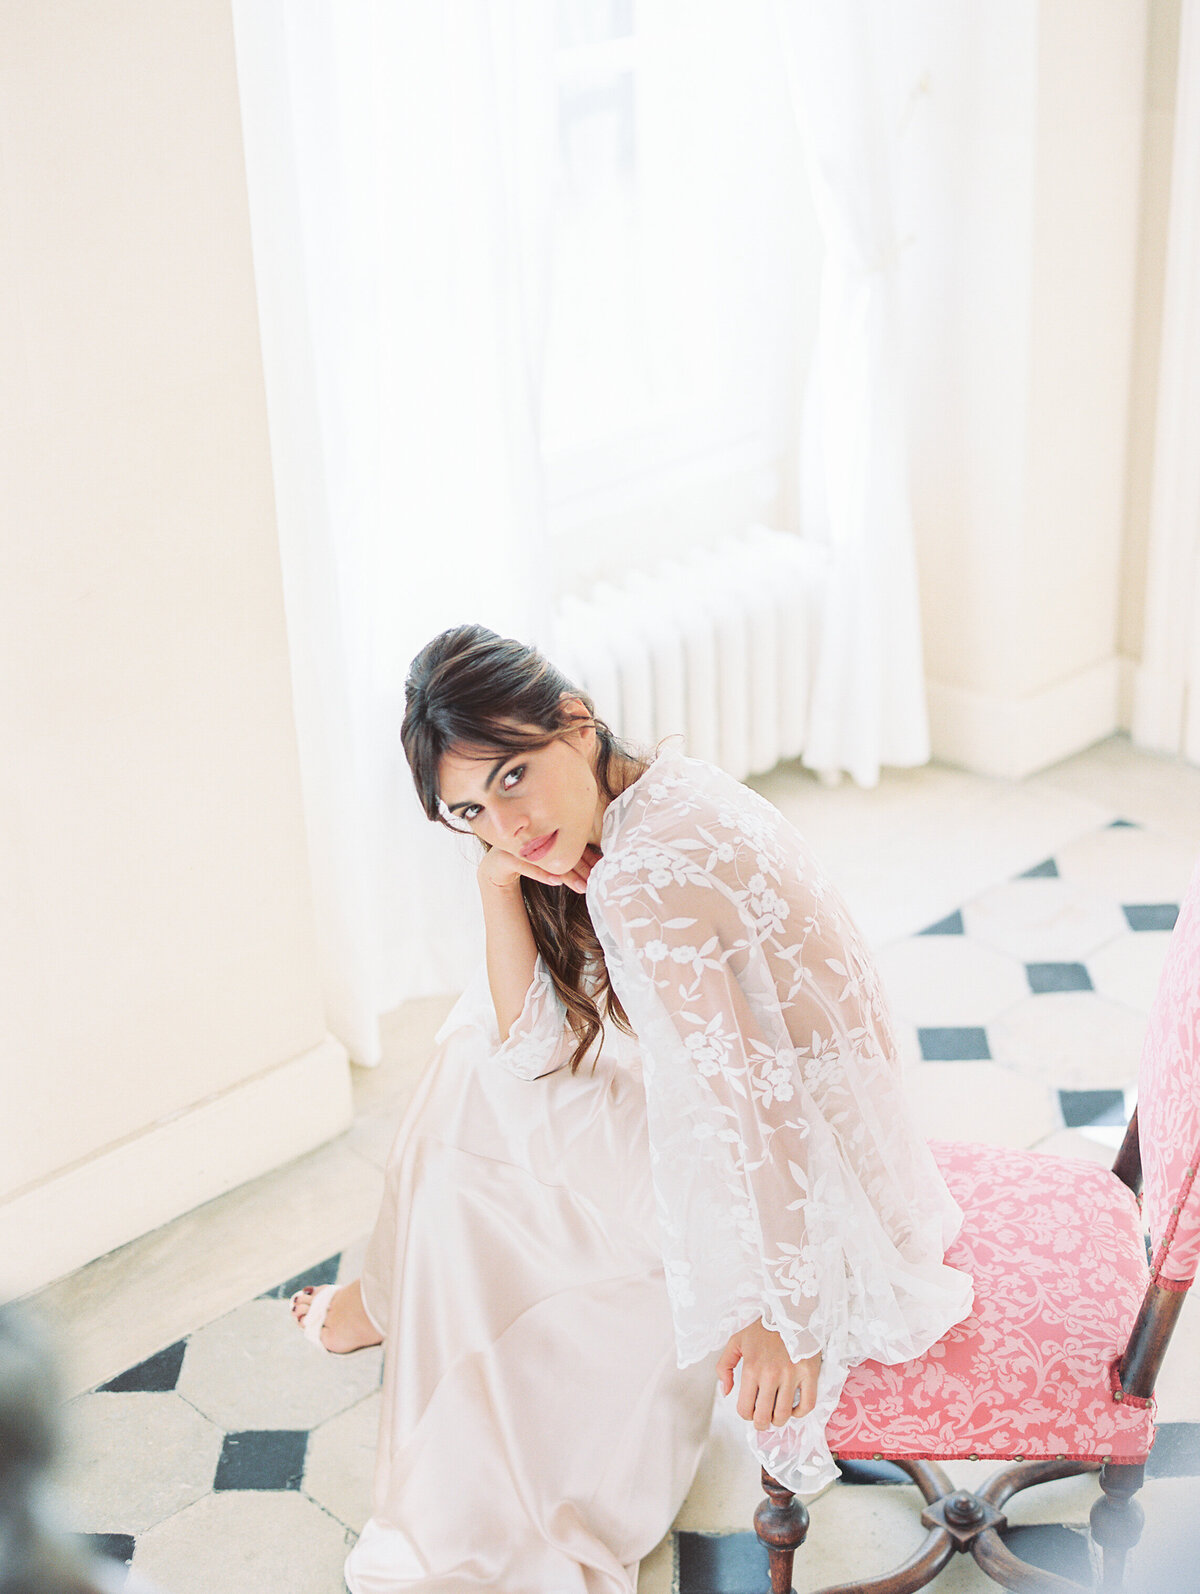 Bride Gets Ready at Chateau de Courtomer